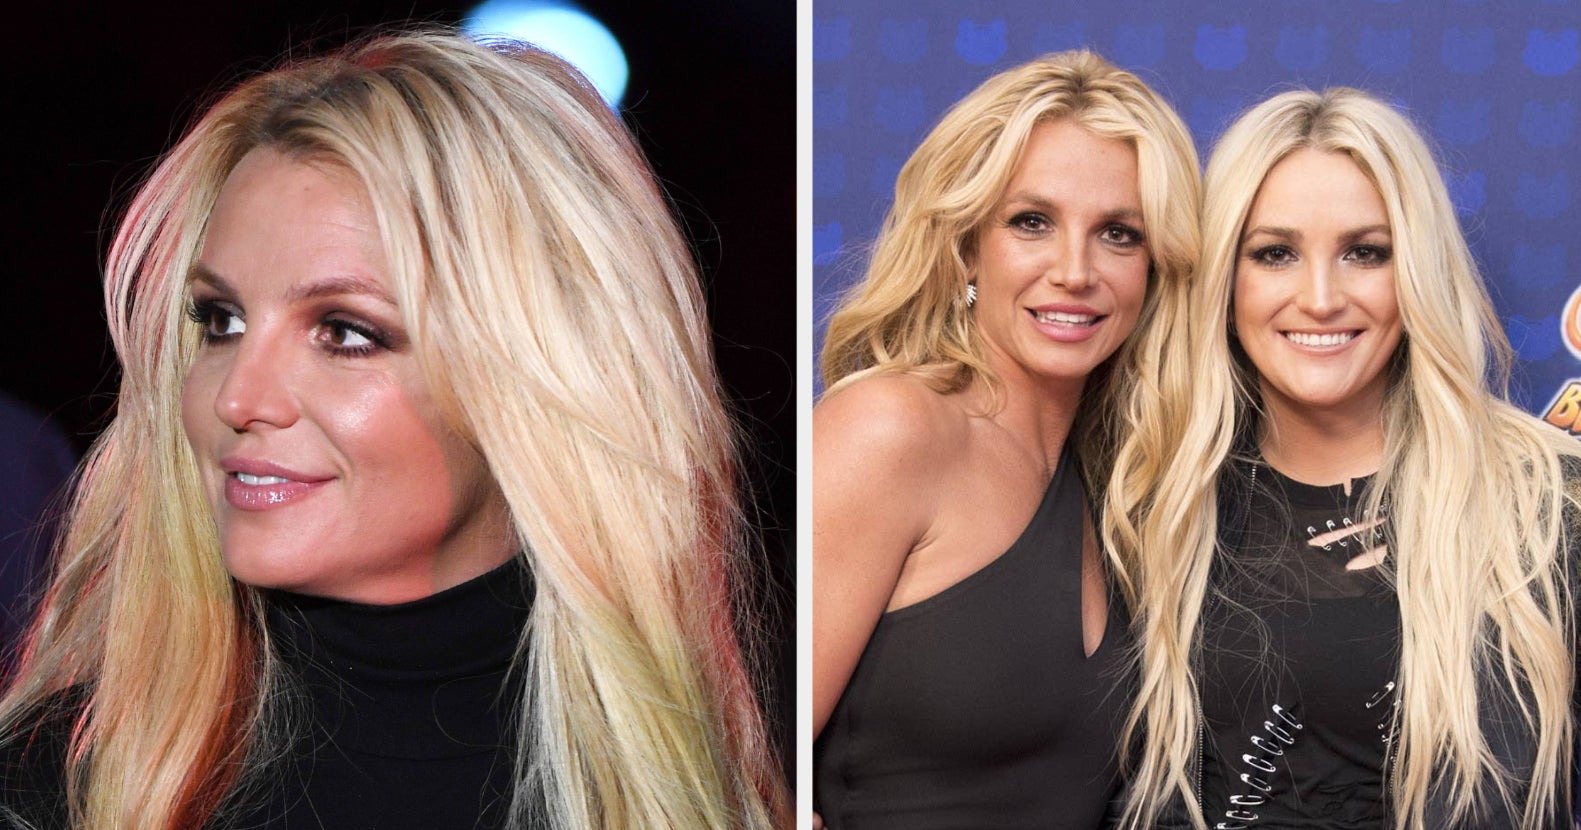 Britney Spears Opened Up About Feeling Like “A Caged Animal For Half Of Her Life” In New Instagram Posts A Day After She Dragged Her Entire Family For Their Lack Of Support During Her Conservatorship